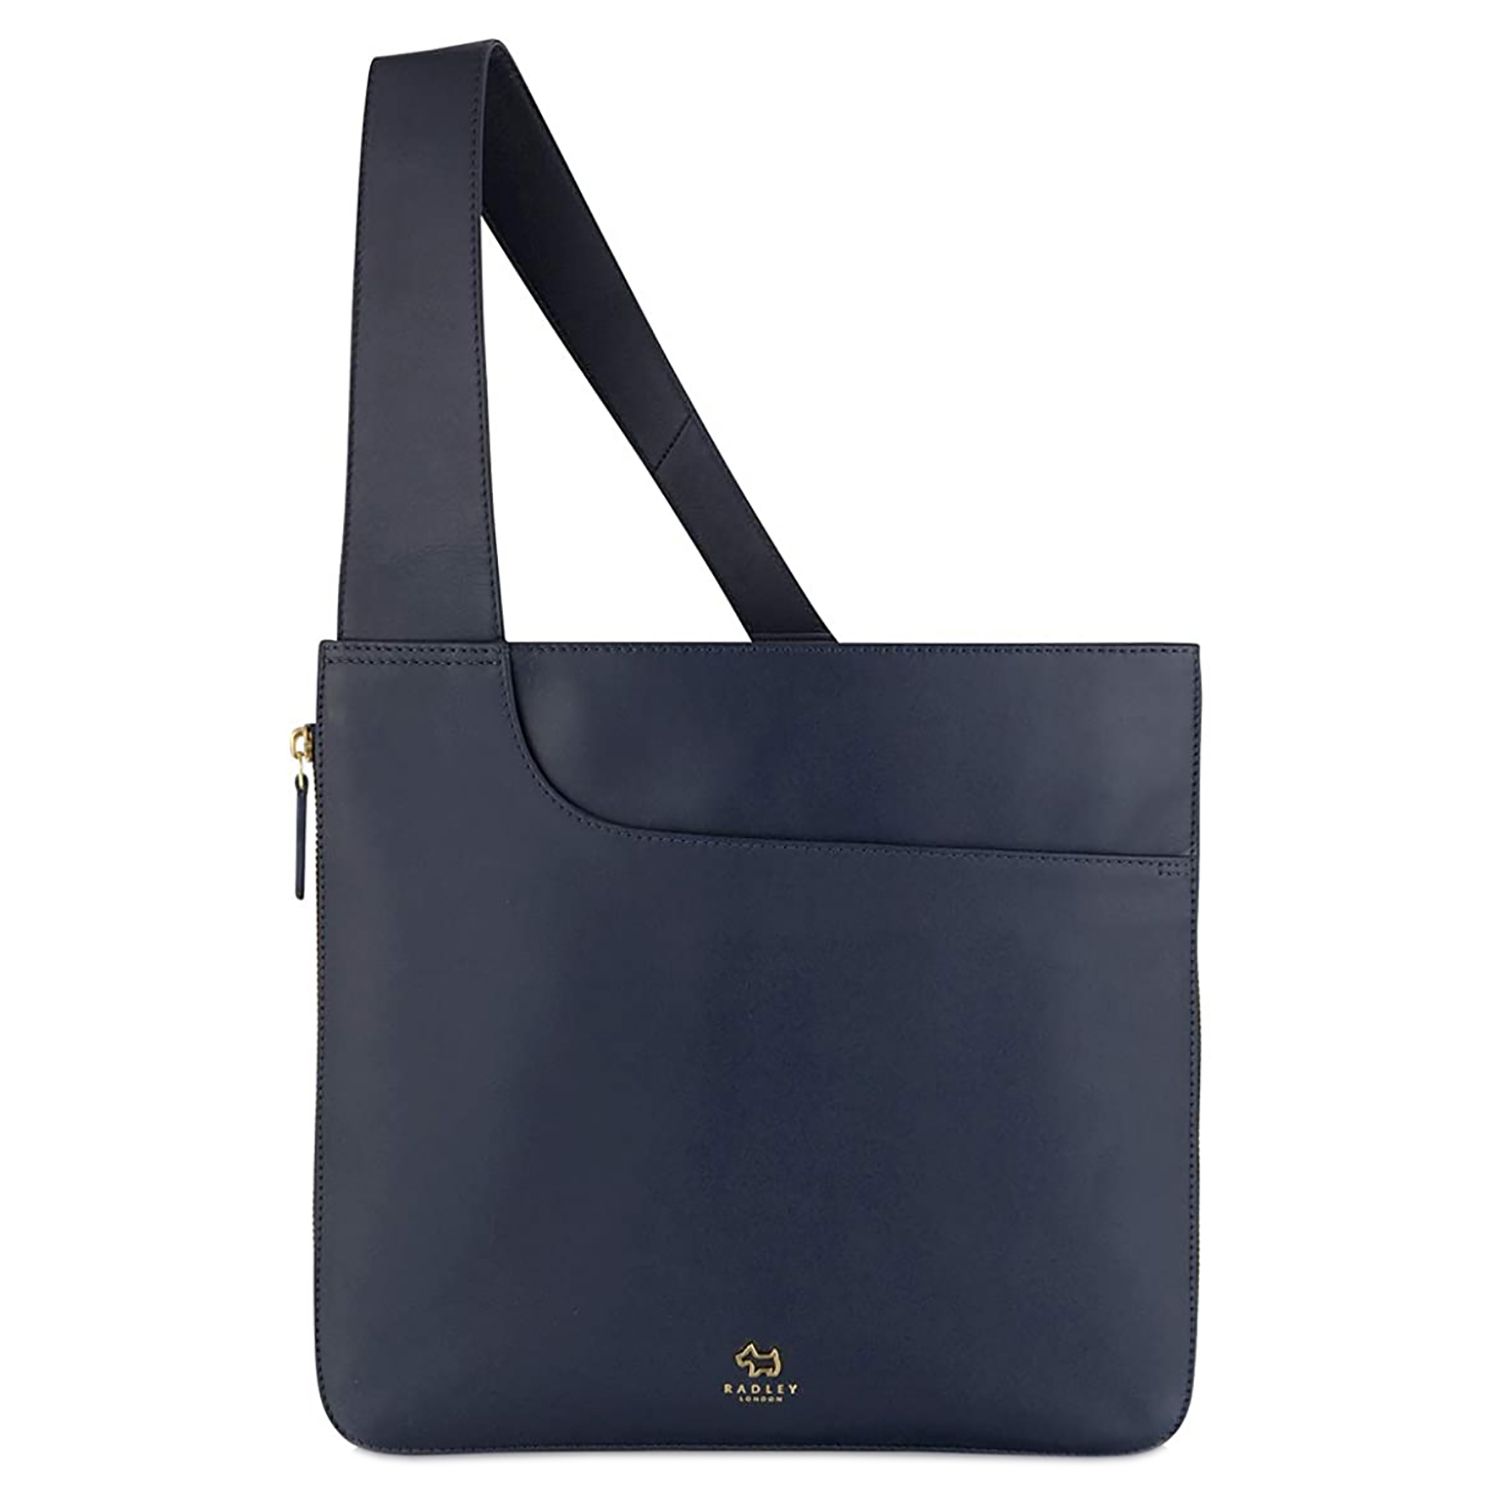 Pippa Middleton-Loved Radley London Bags Are on Sale for Prime Day ...